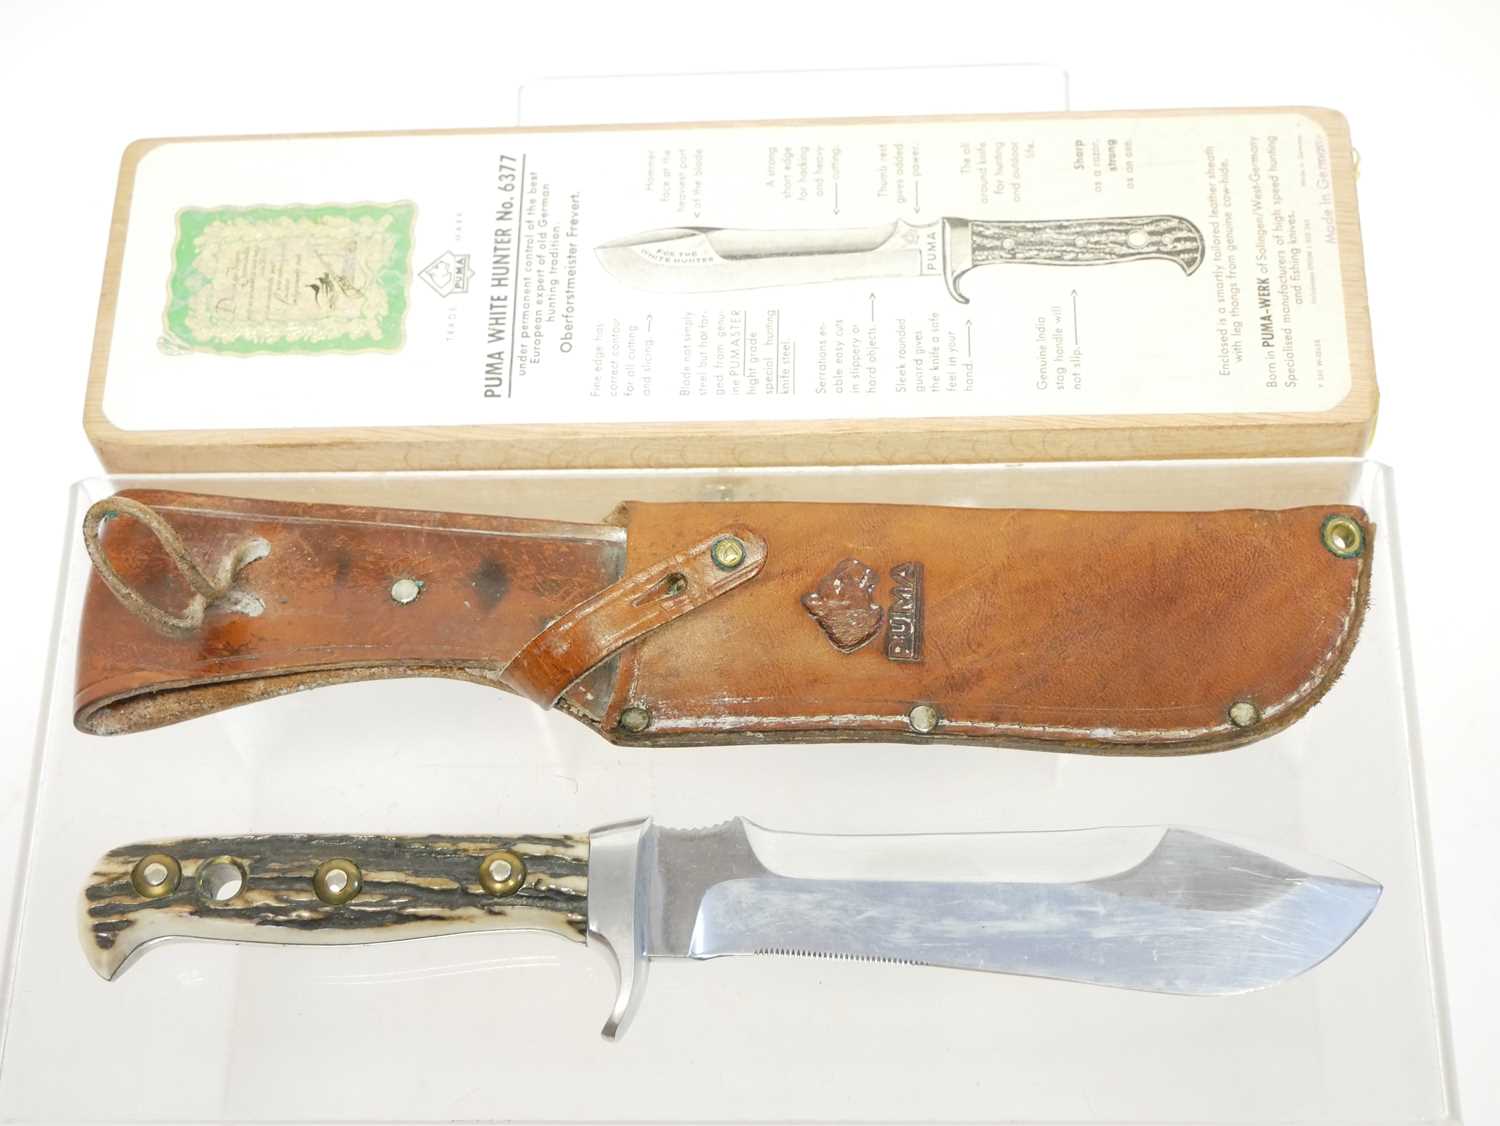 Puma White Hunter no.6377 knife, 6 inch blade, stag horn grips, with leather sheath and box. Buyer - Image 2 of 6